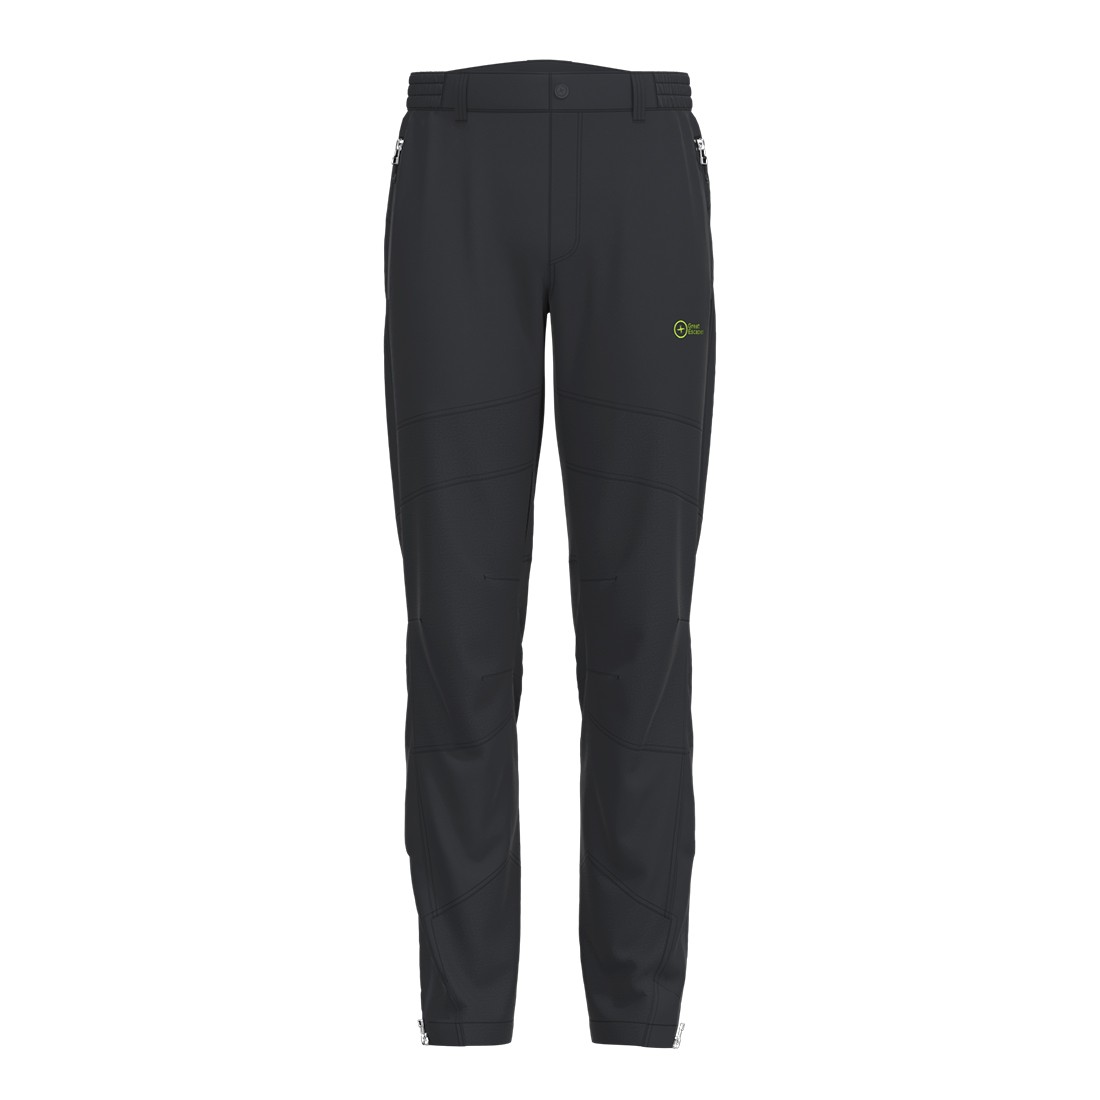 CERVINO ECO - Men's technical recycled pant